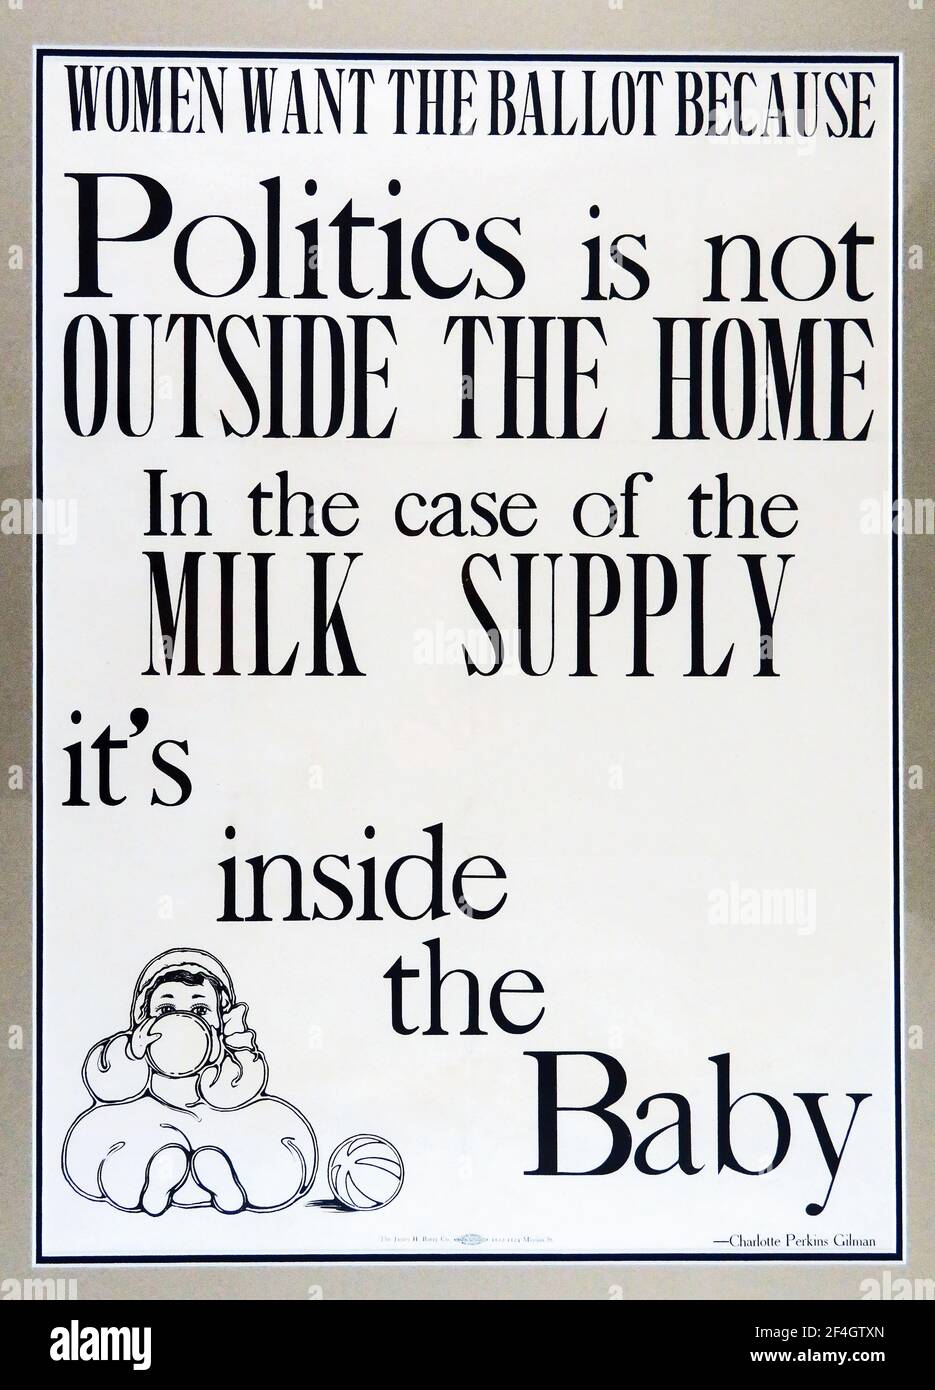 Poster with an illustration of a baby drinking milk, with a Charlotte Perkins Gilman quote linking suffrage to children's welfare and the purity of the milk supply, printed for the American market, 1900. Photography by Emilia van Beugen. () Stock Photo